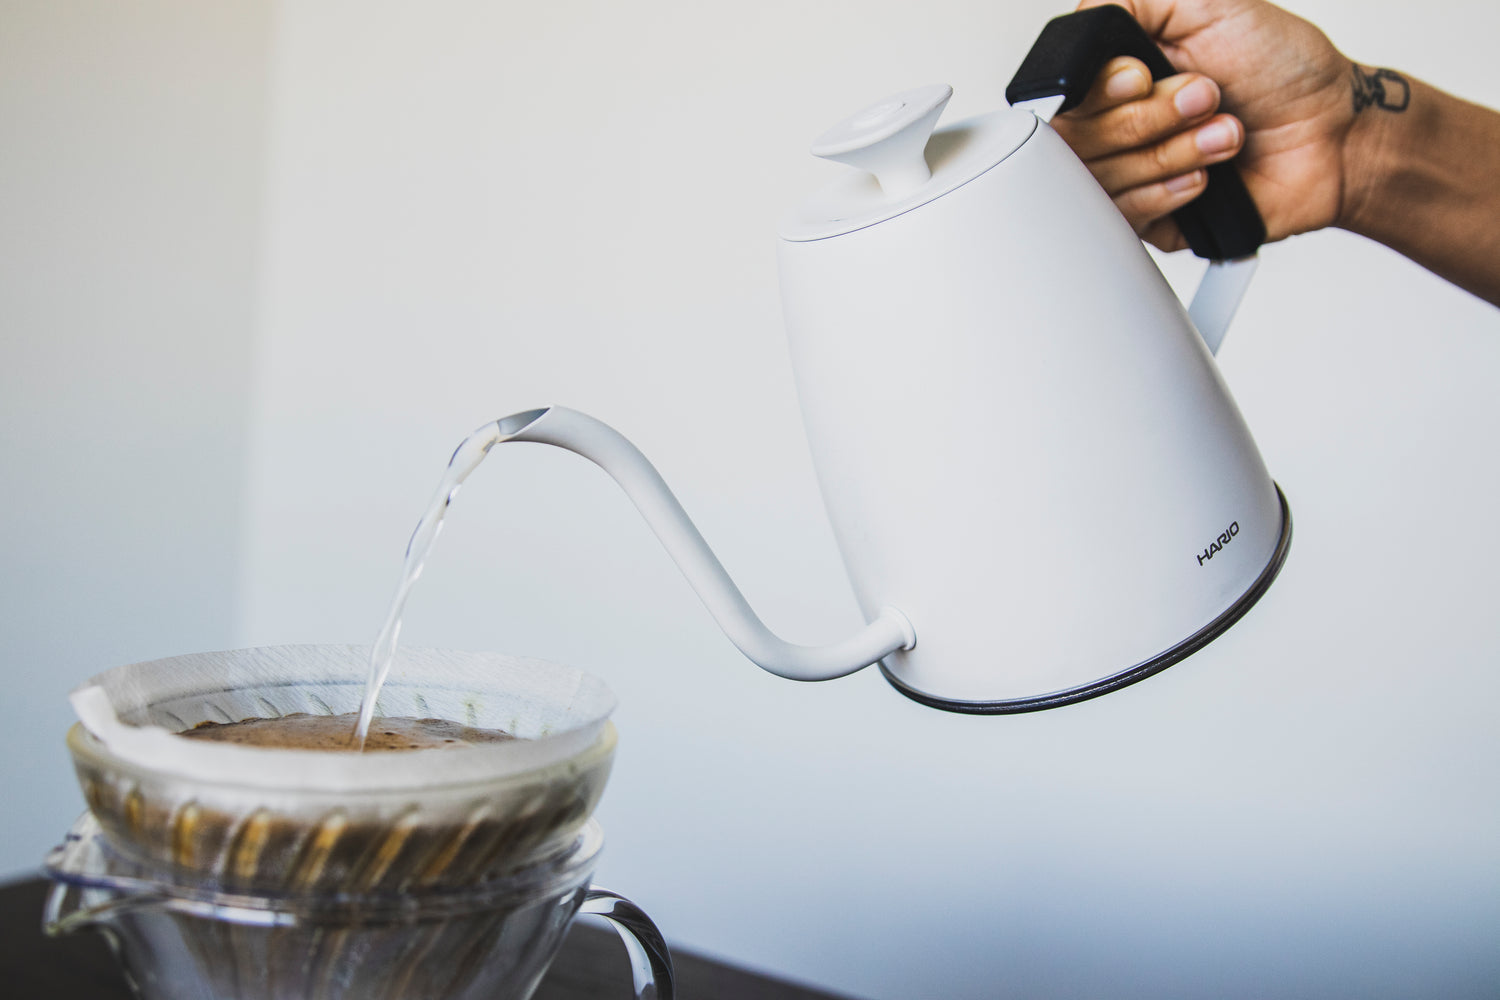 Hand pouring a matte white metal gooseneck kettle with white lid knob and black rubber handle cover into a glass cone-shaped filter with blooming coffee and seated in a glass pitcher.